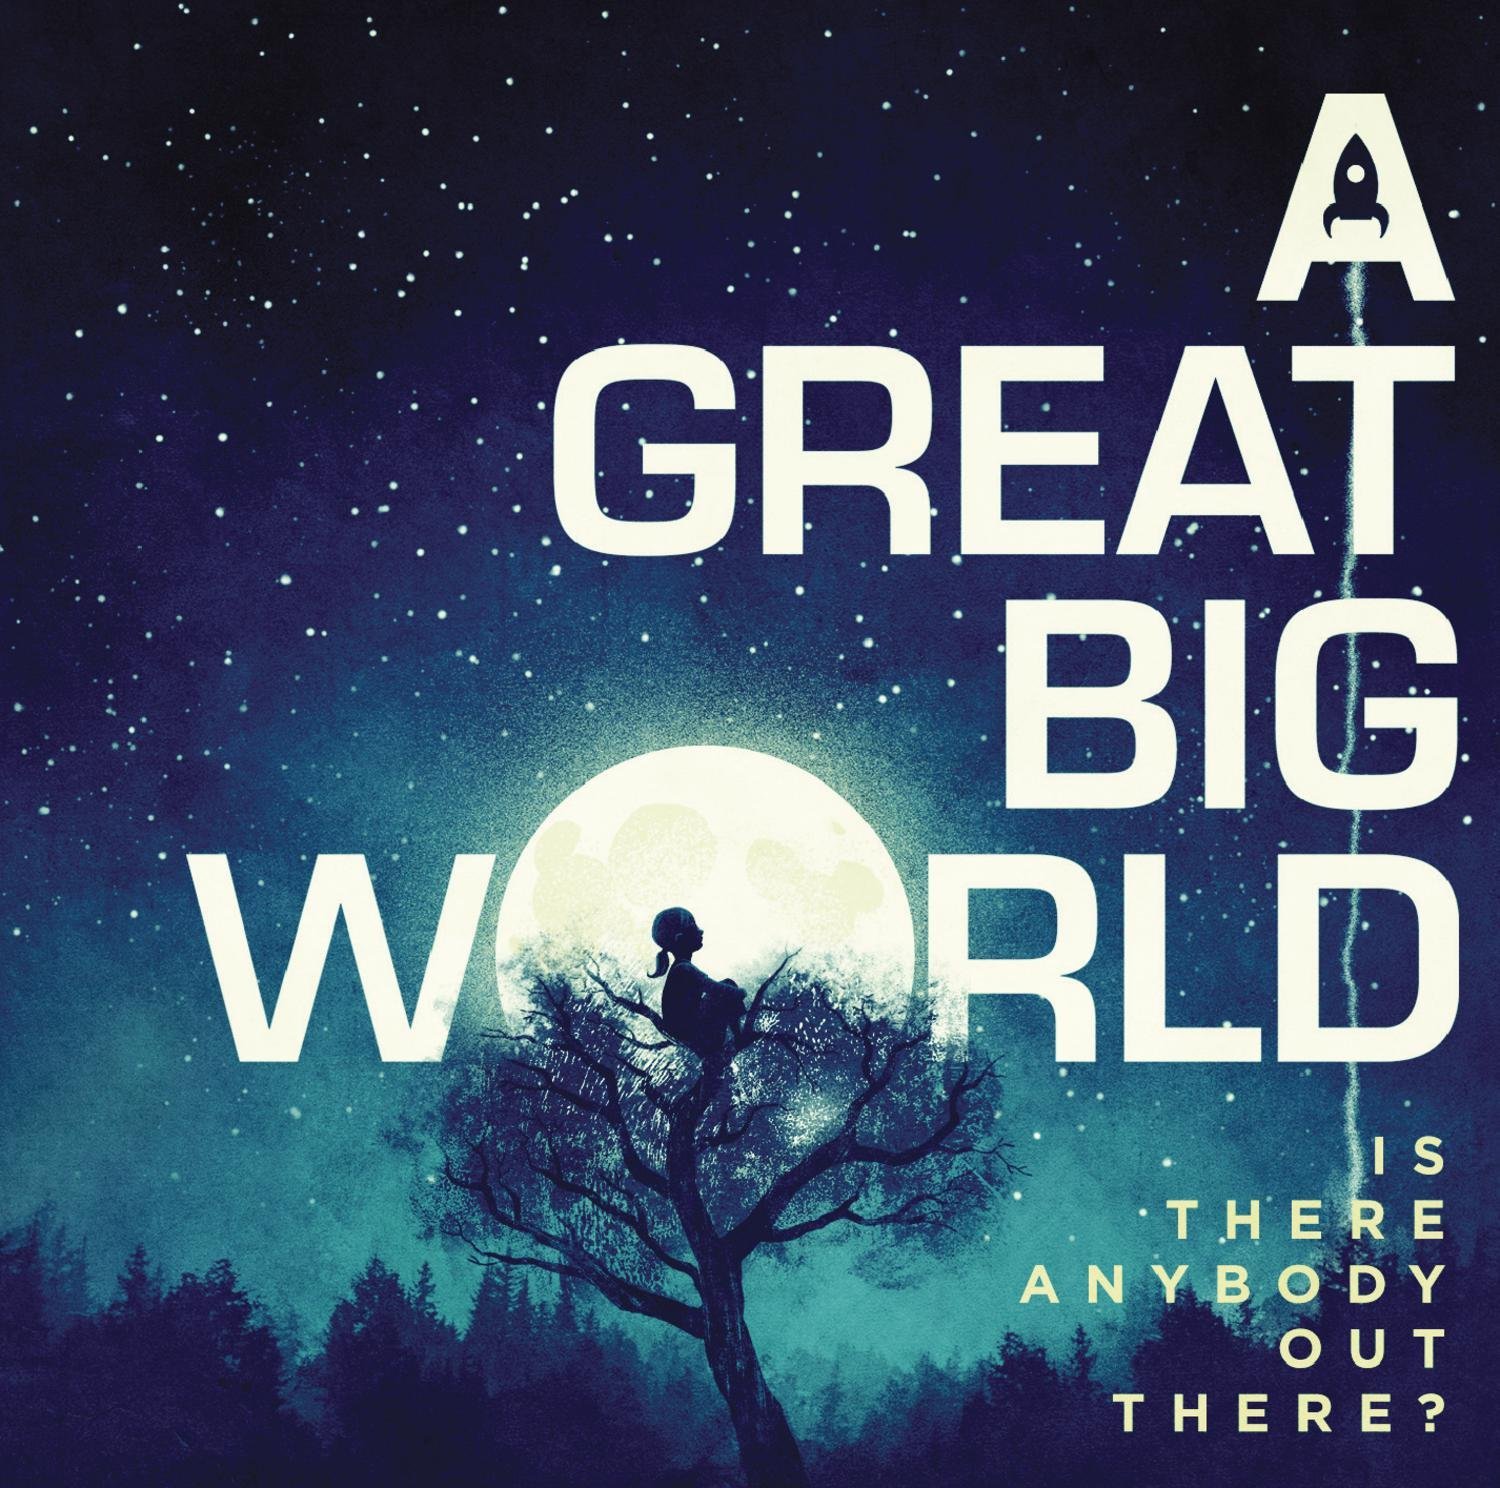 A Great Big World – Is There Anybody Out There (2014) [HDTracks FLAC 24bit/44,1kHz]